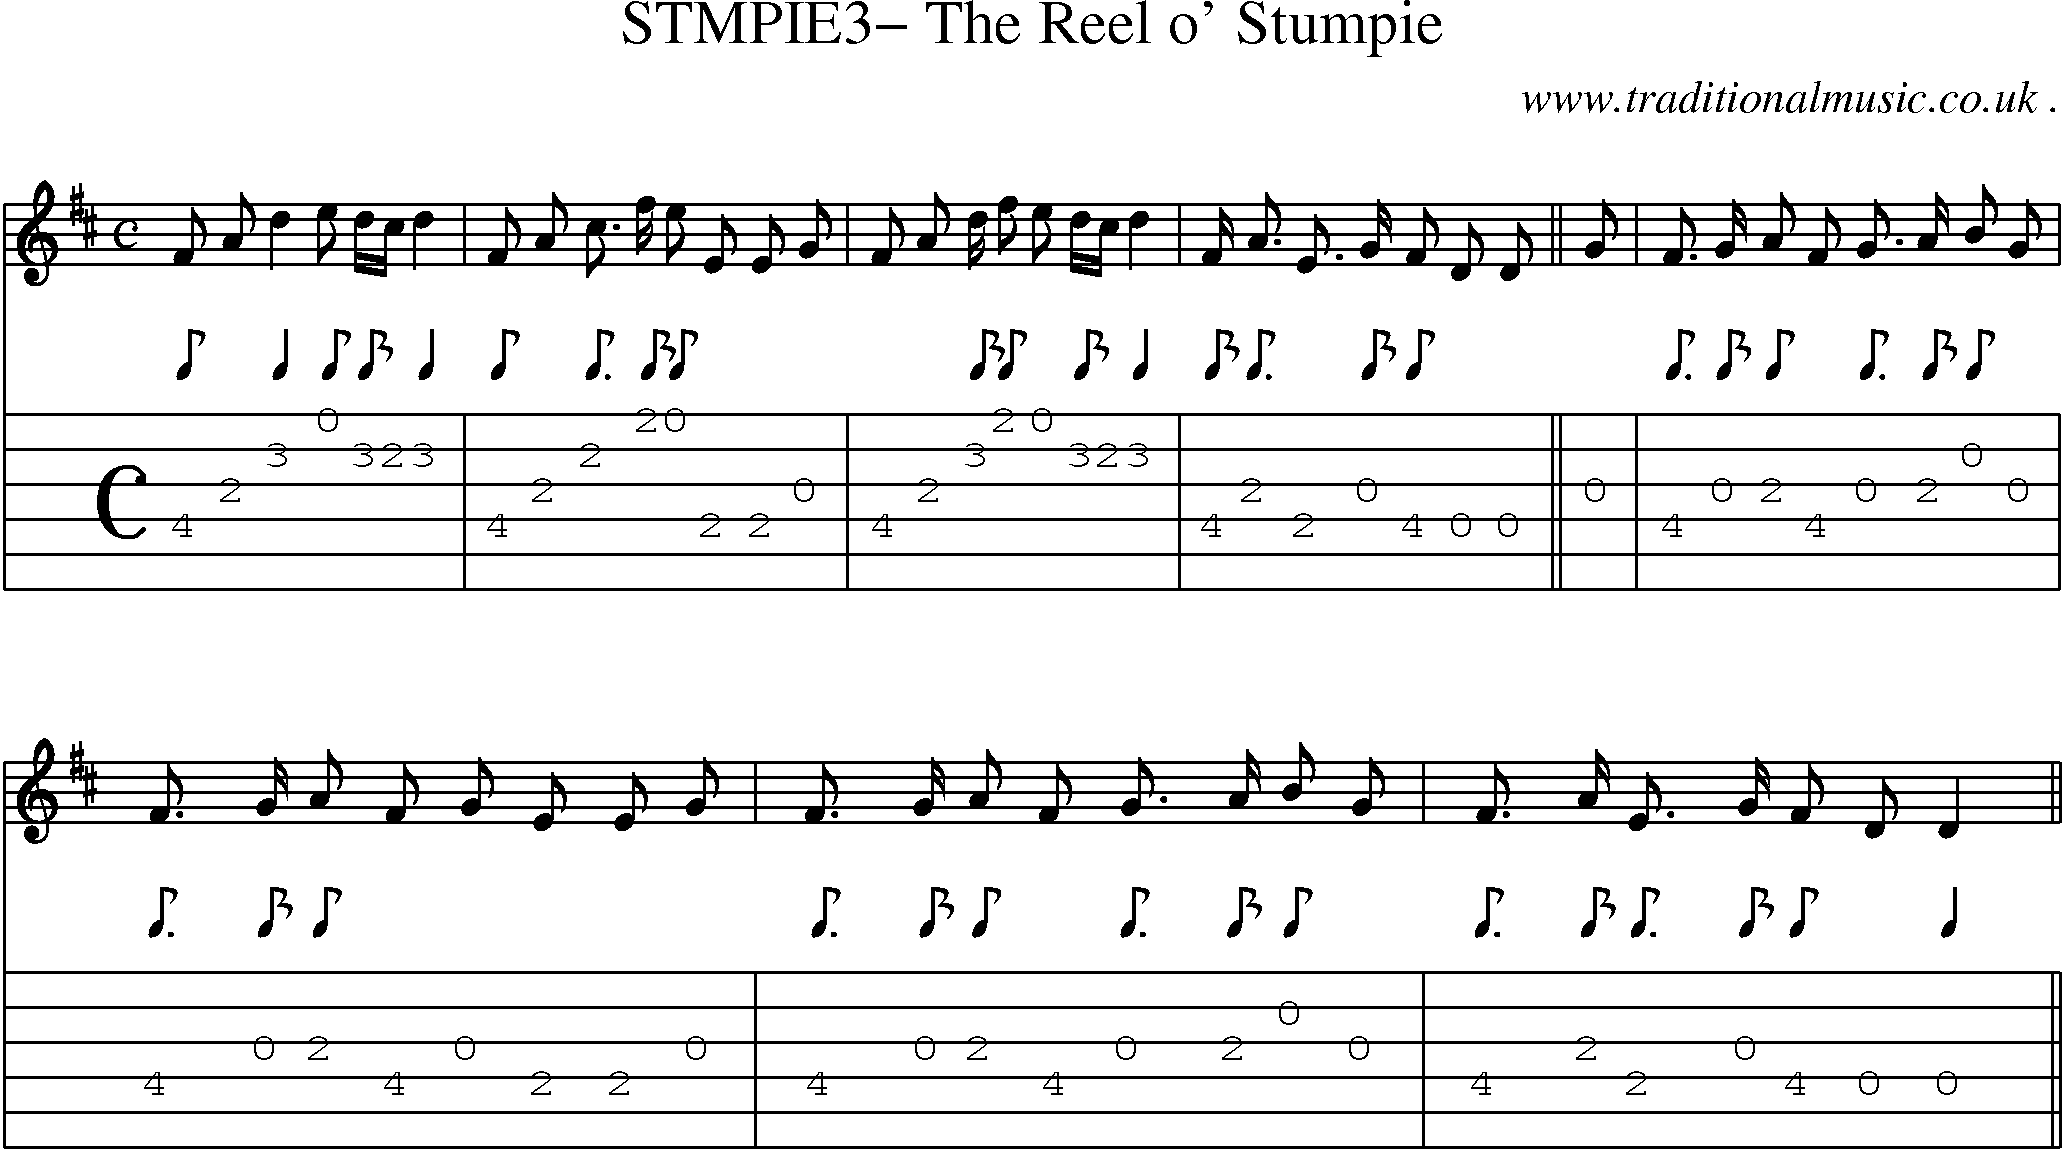 Sheet-Music and Guitar Tabs for Stmpie3 The Reel O Stumpie